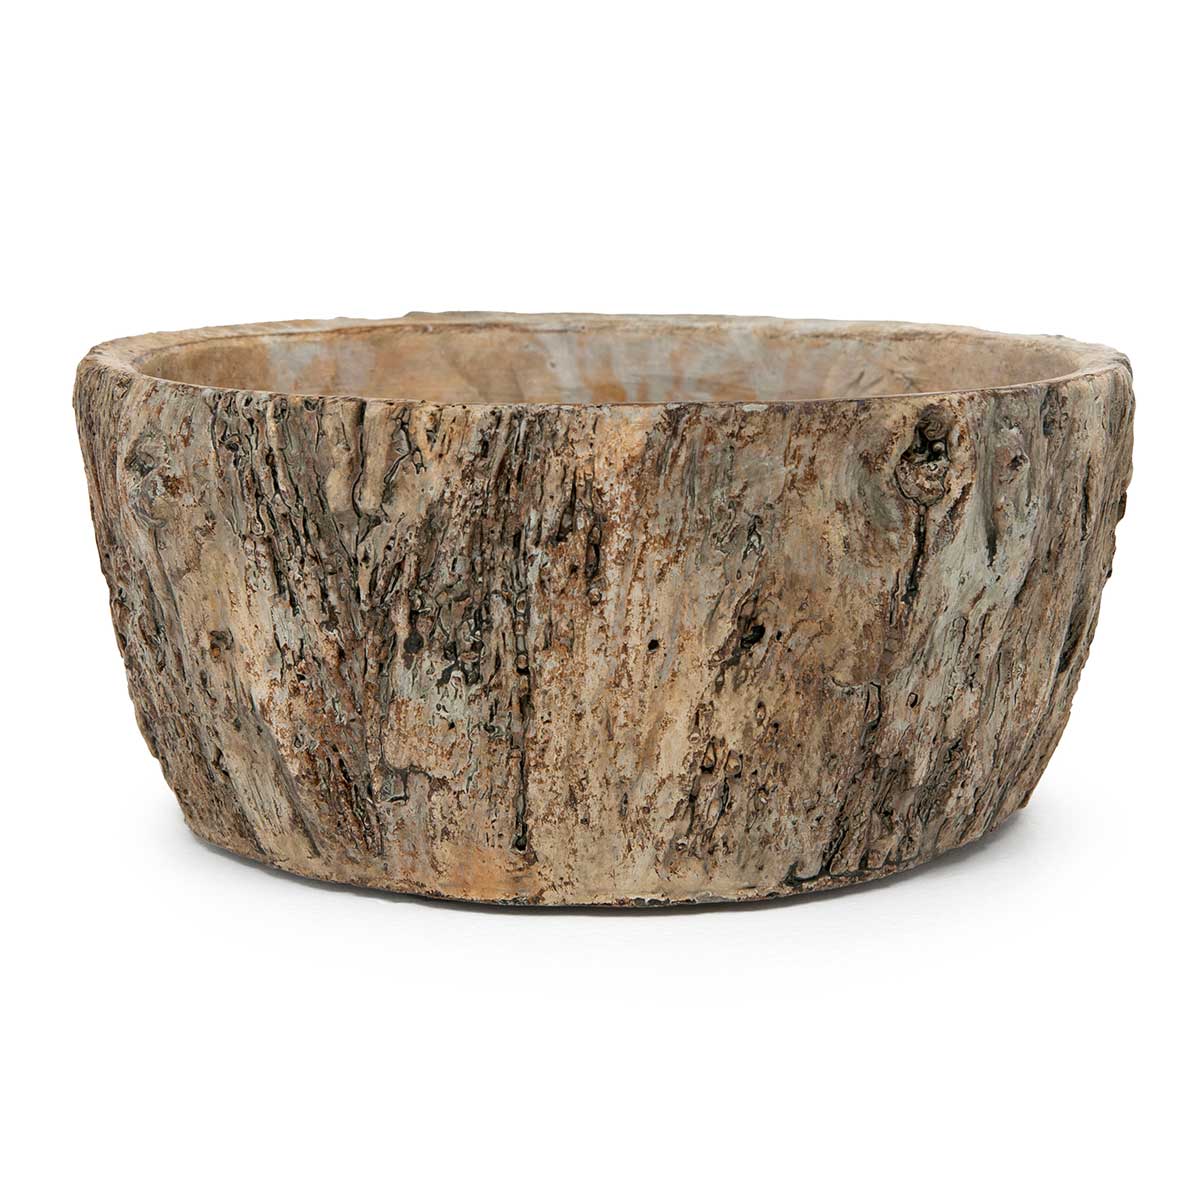 POT BARK BOWL 6.5IN X 3IN BROWN CONCRETE WITH WATERTIGHT GLAZE